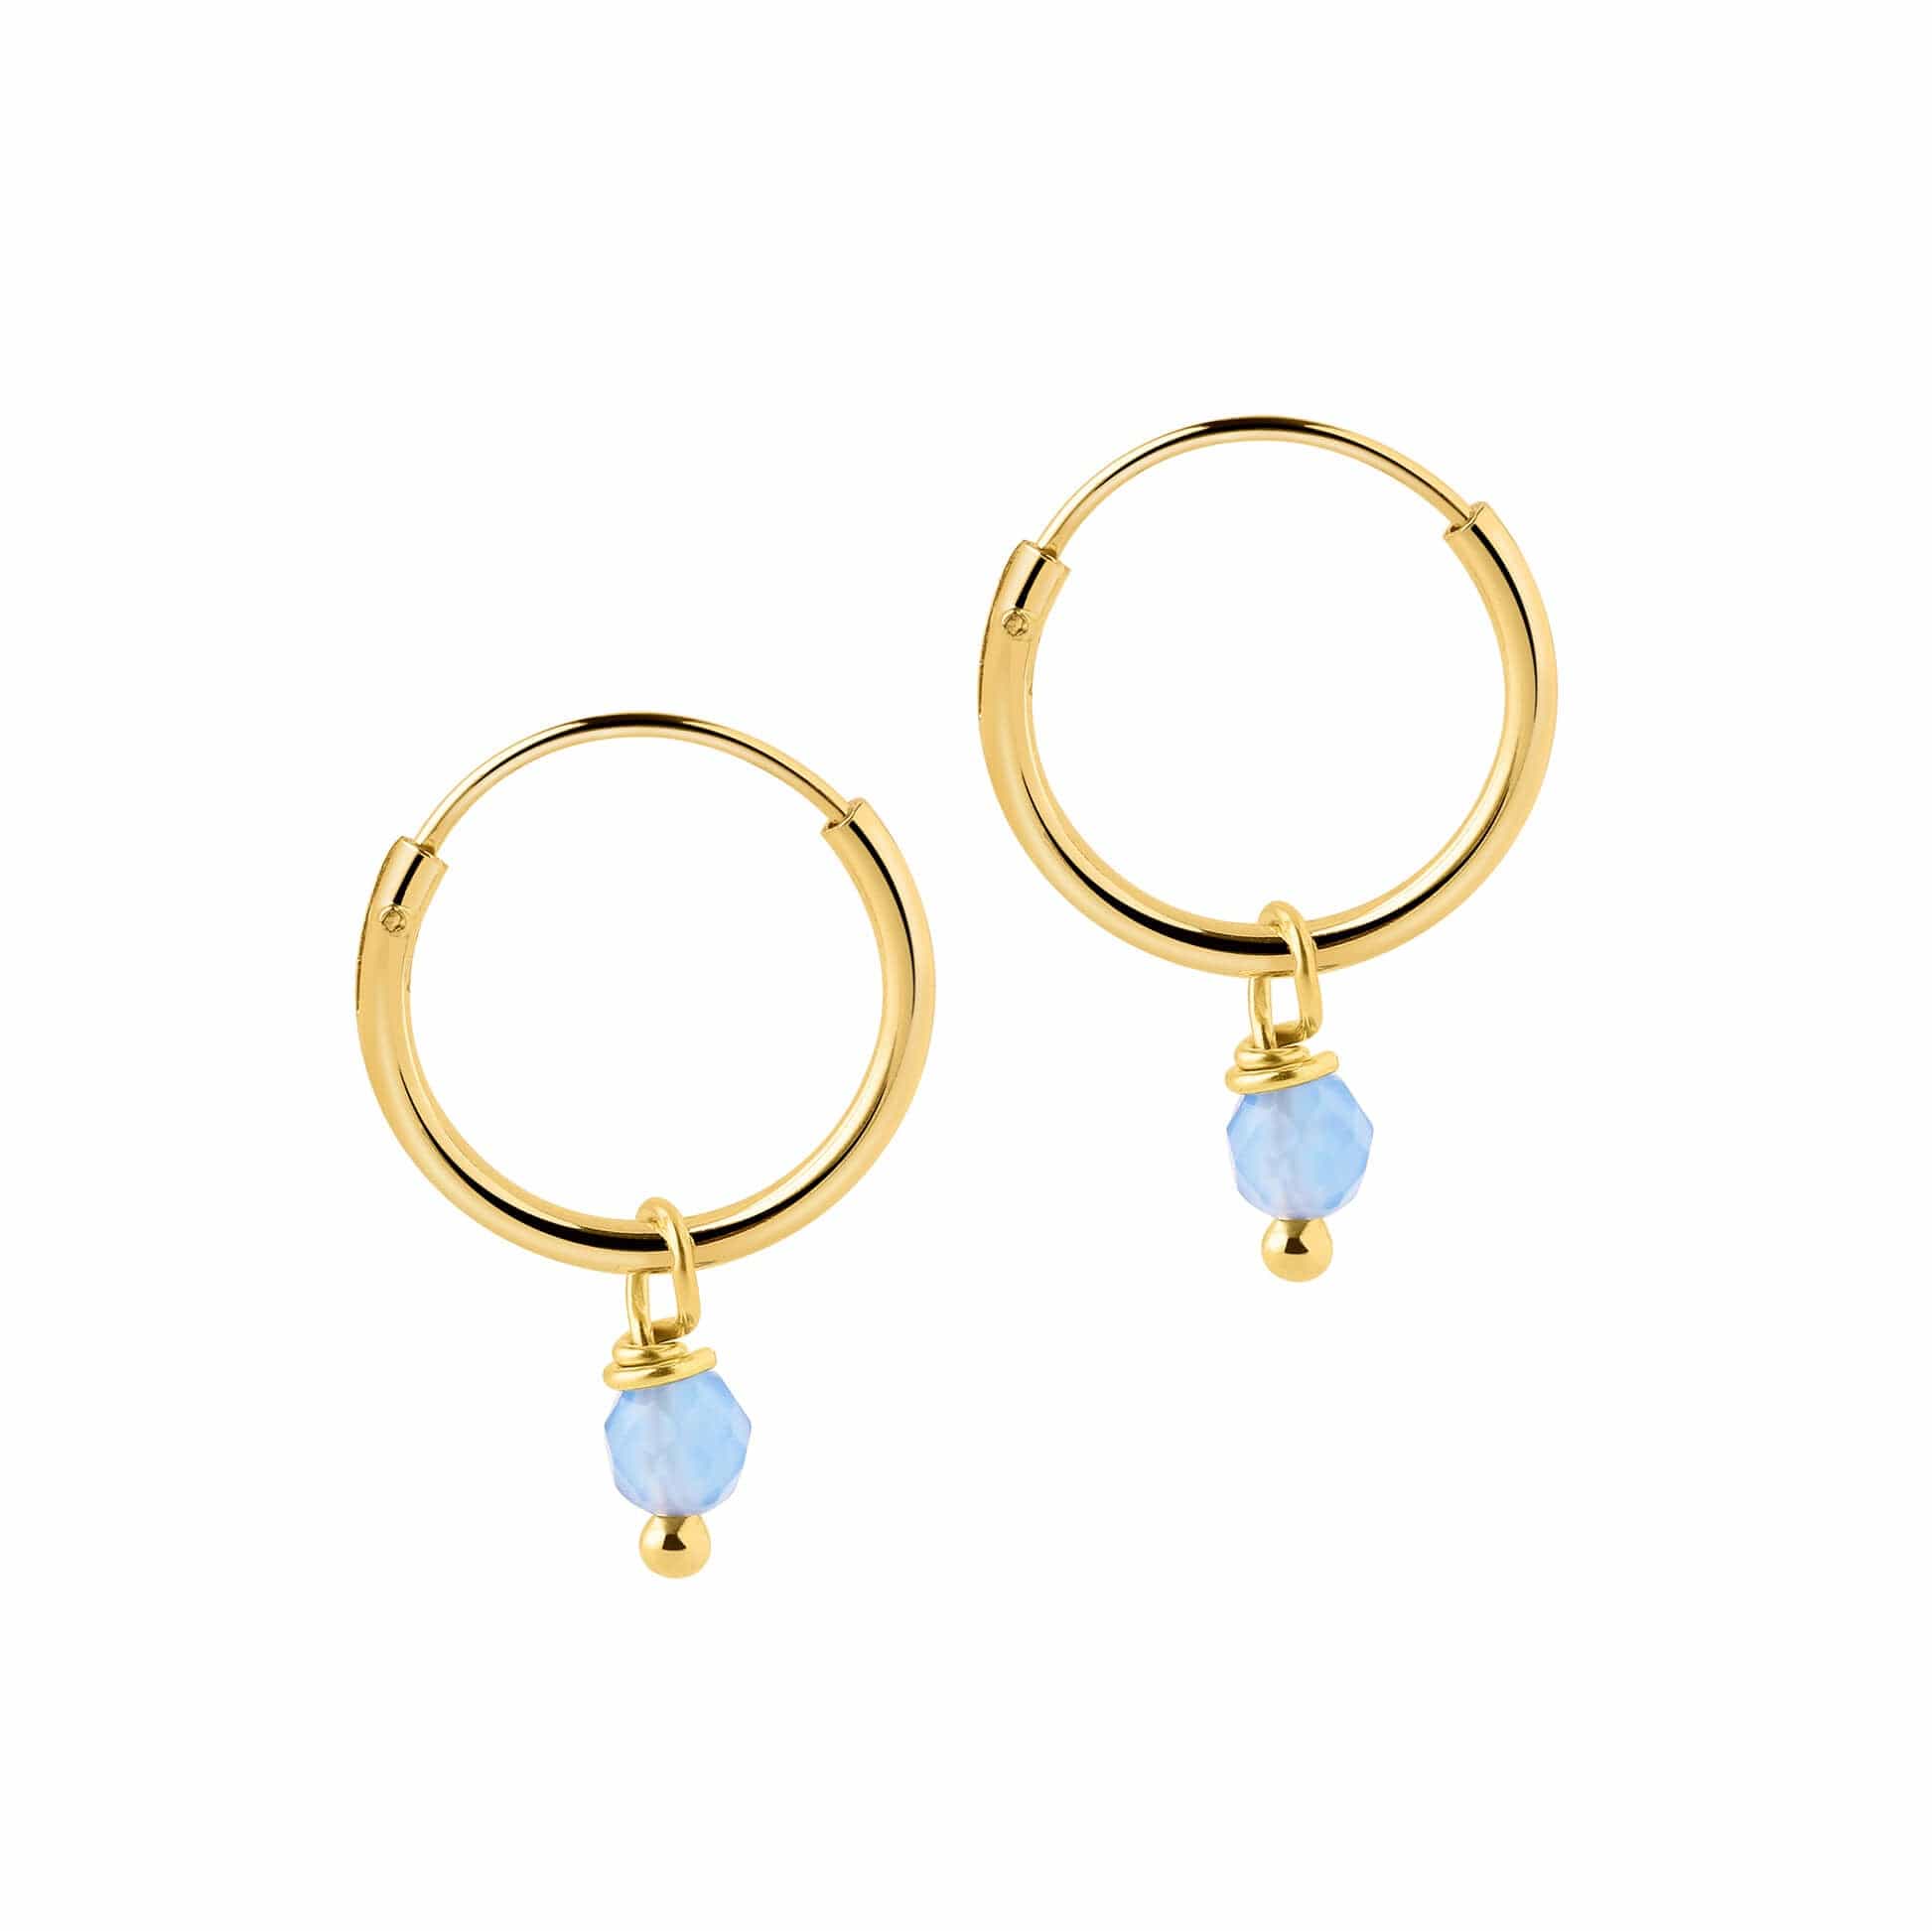 Medium Gold Plated Hoop Earrings with Blue Stone